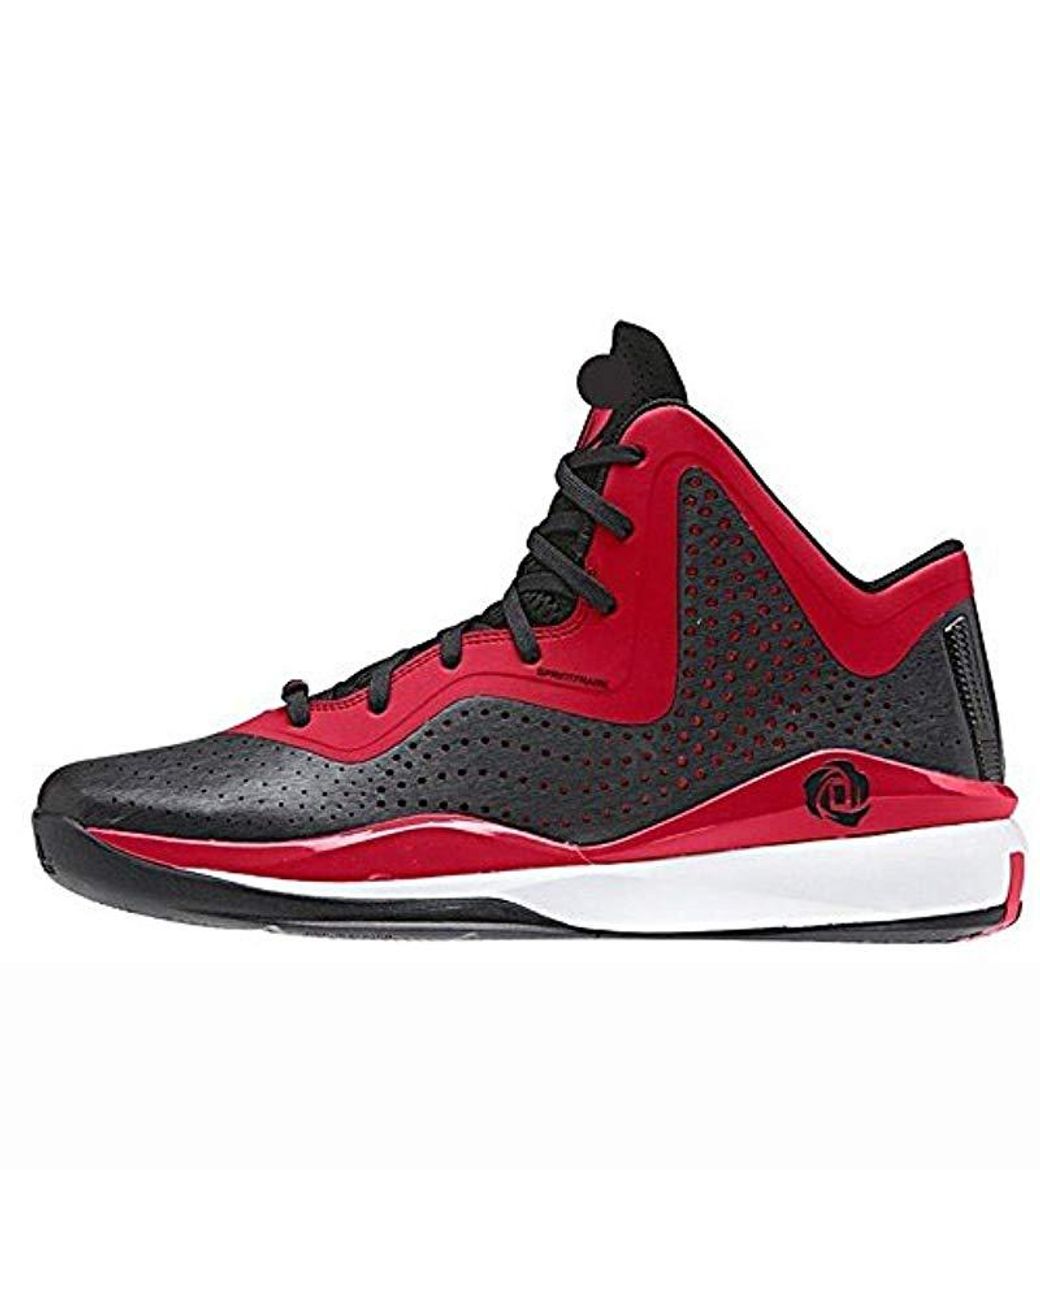 projector composiet Oven adidas Performance Derrick Rose 773 Ii Black Red Basketball Shoes  Sprintframe for Men | Lyst UK